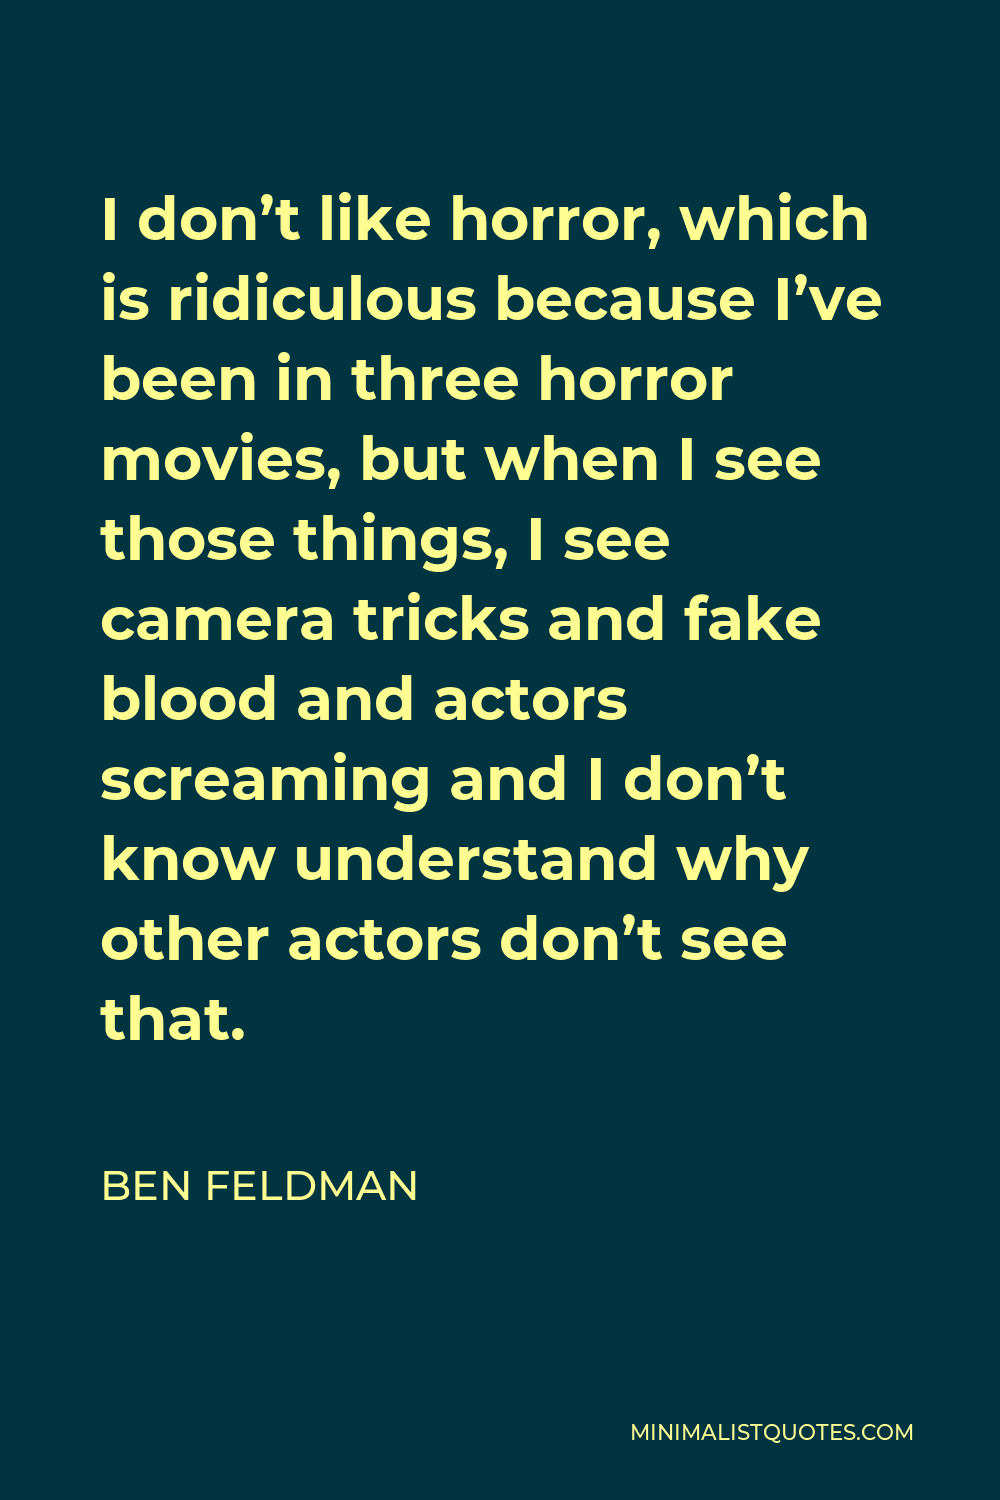 Ben Feldman Quote - I don’t like horror, which is ridiculous because I’ve been in three horror movies, but when I see those things, I see camera tricks and fake blood and actors screaming and I don’t know understand why other actors don’t see that.